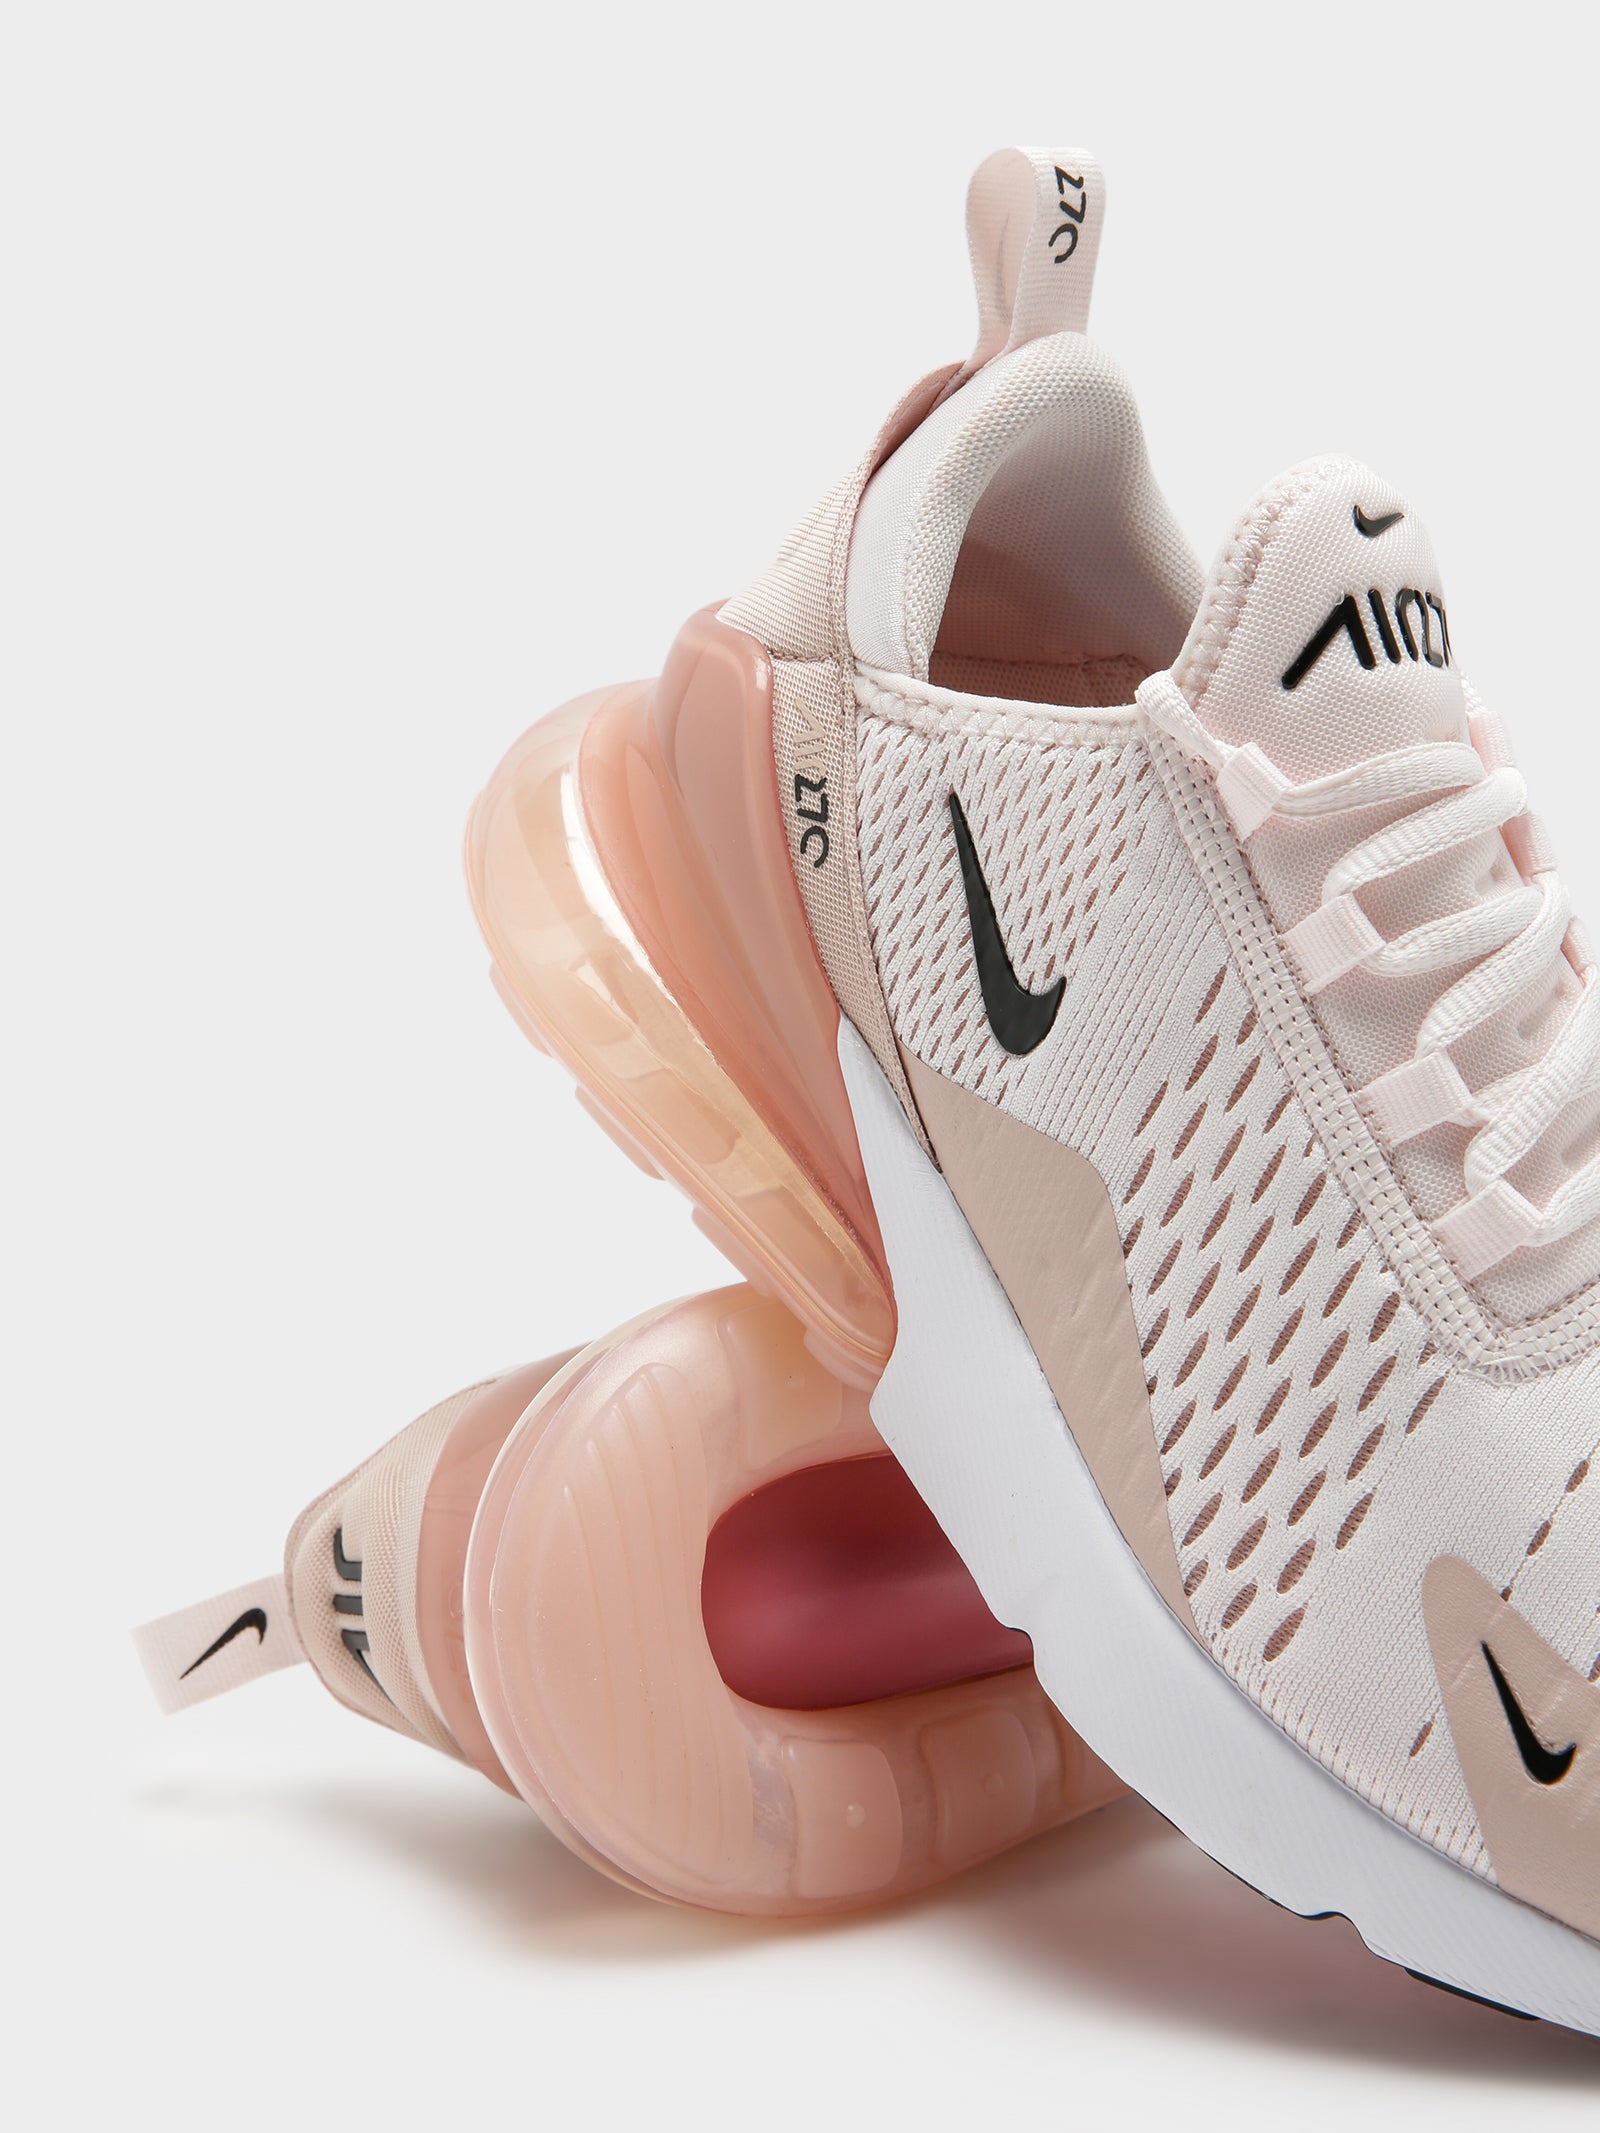 ❖Nike air max 270 women shoes samol pink color | Shopee Philippines